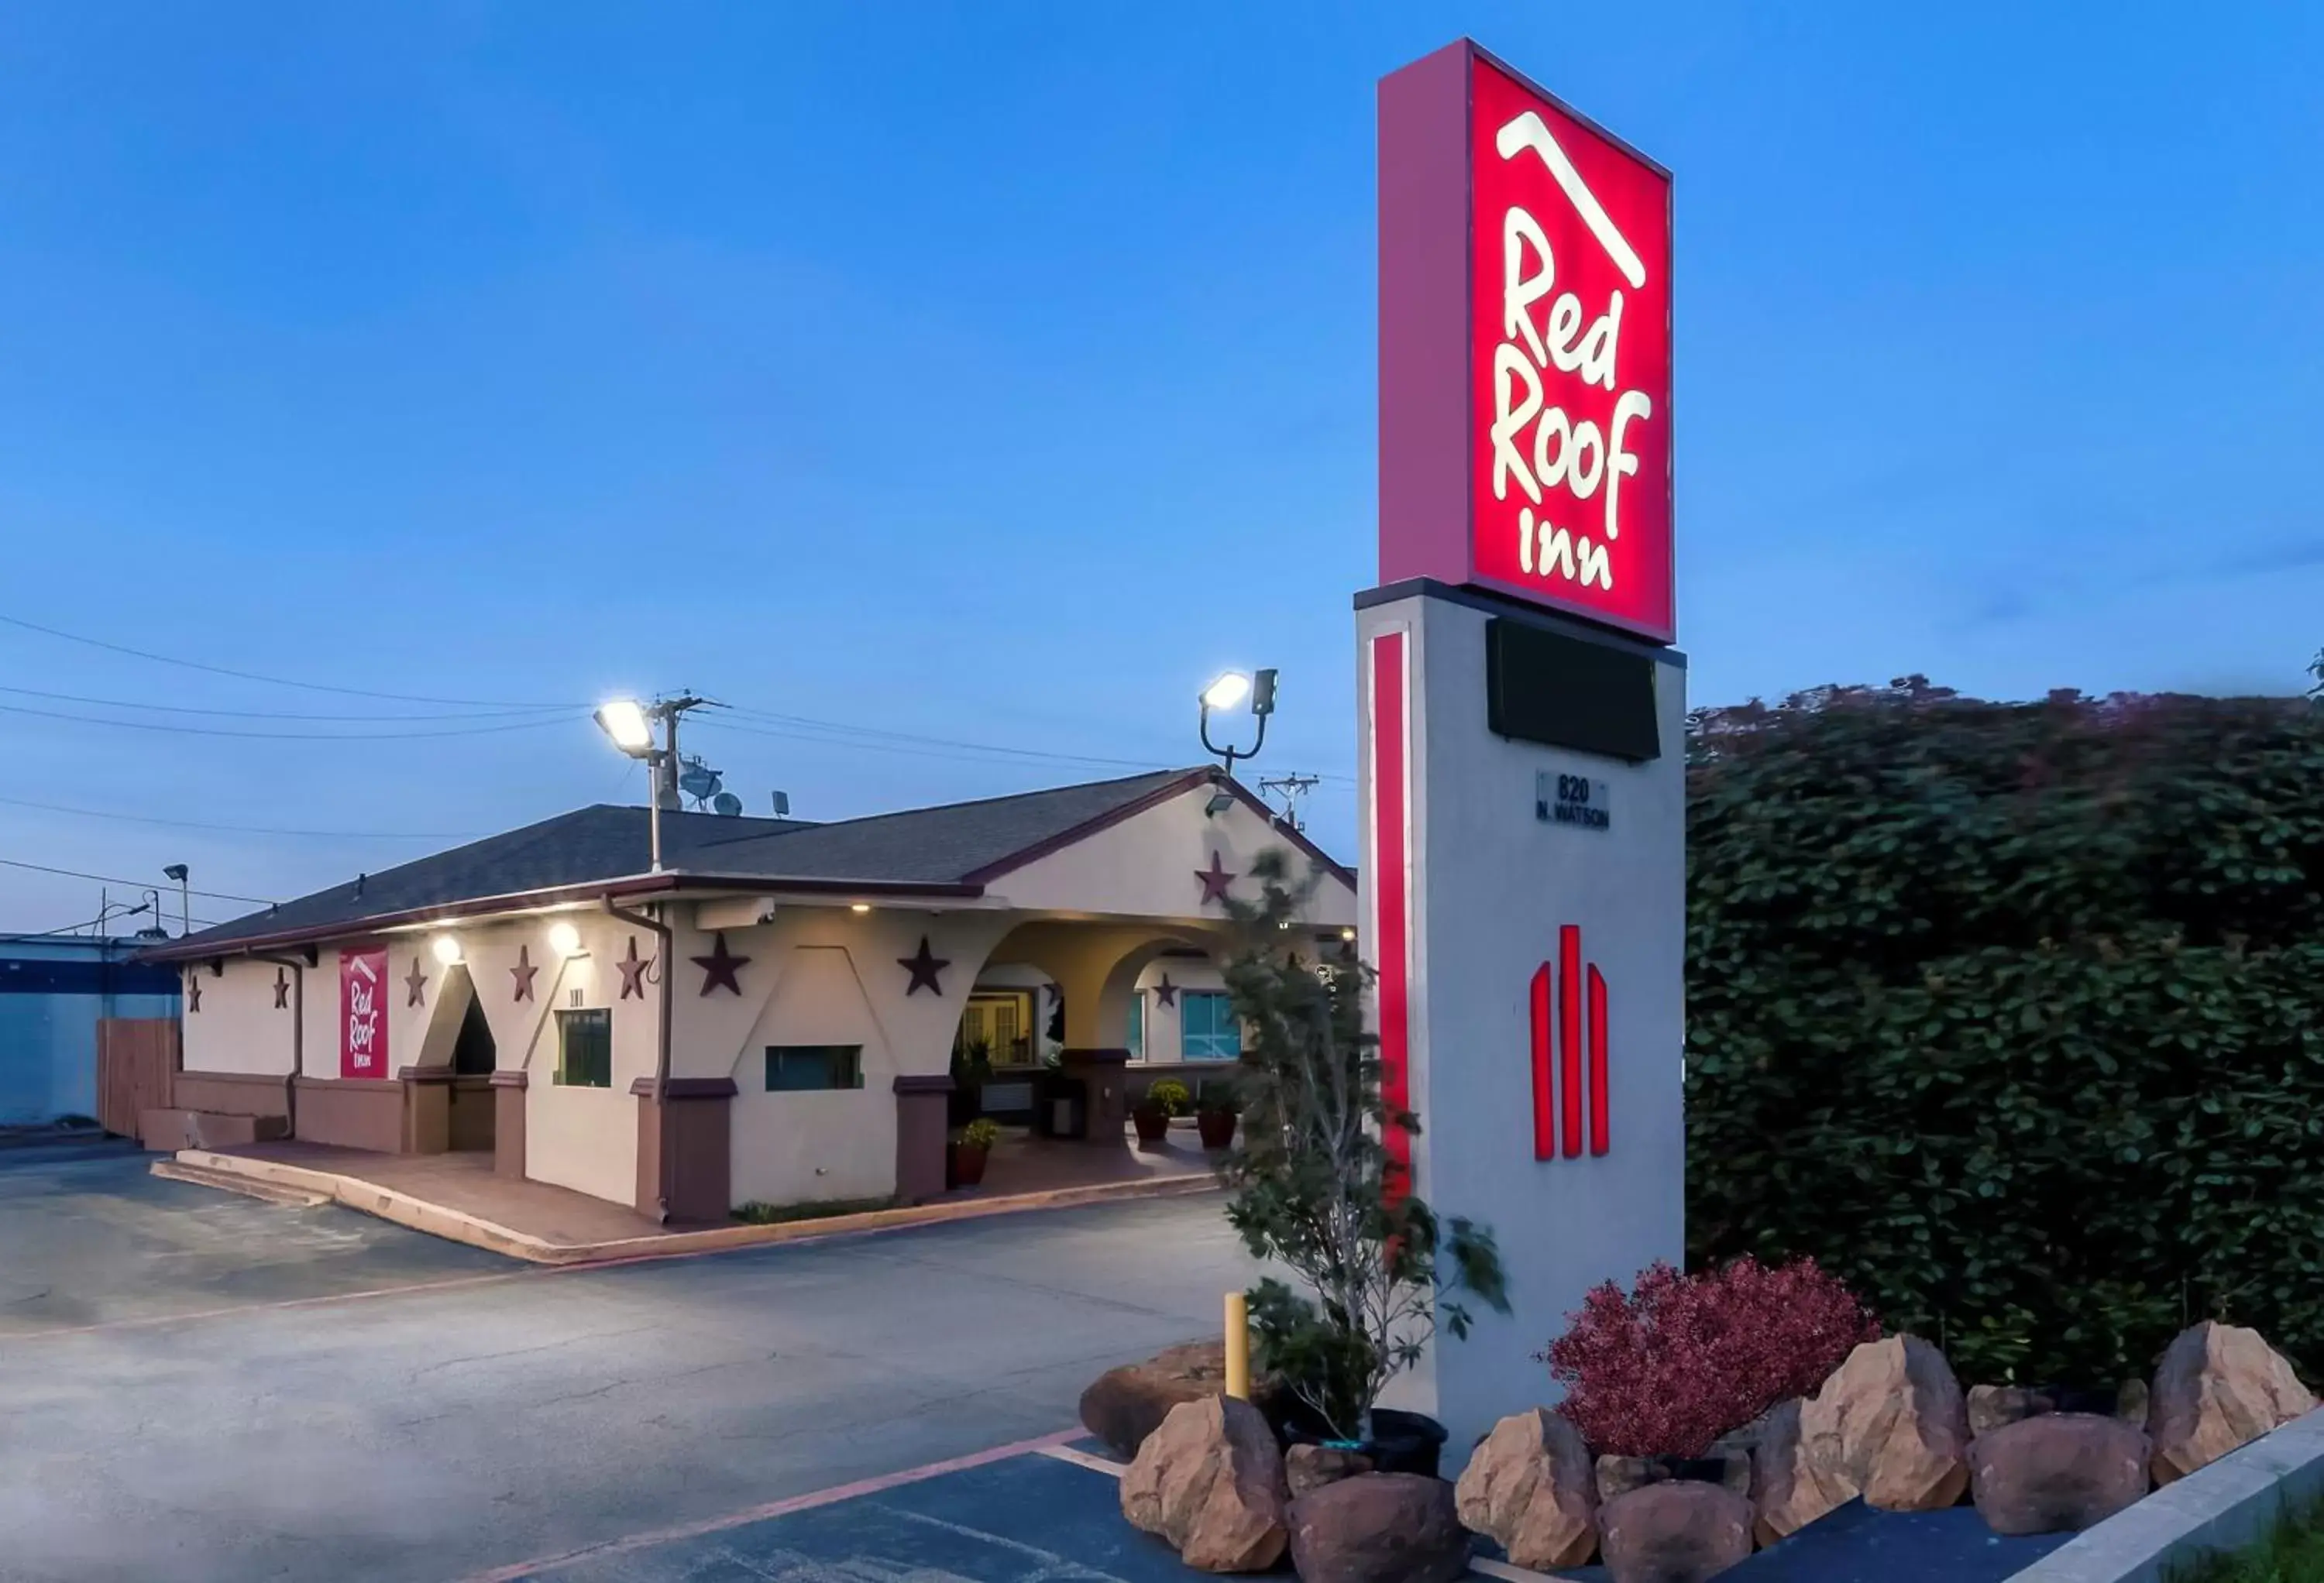 Property building, Facade/Entrance in Red Roof Inn Arlington - Entertainment District